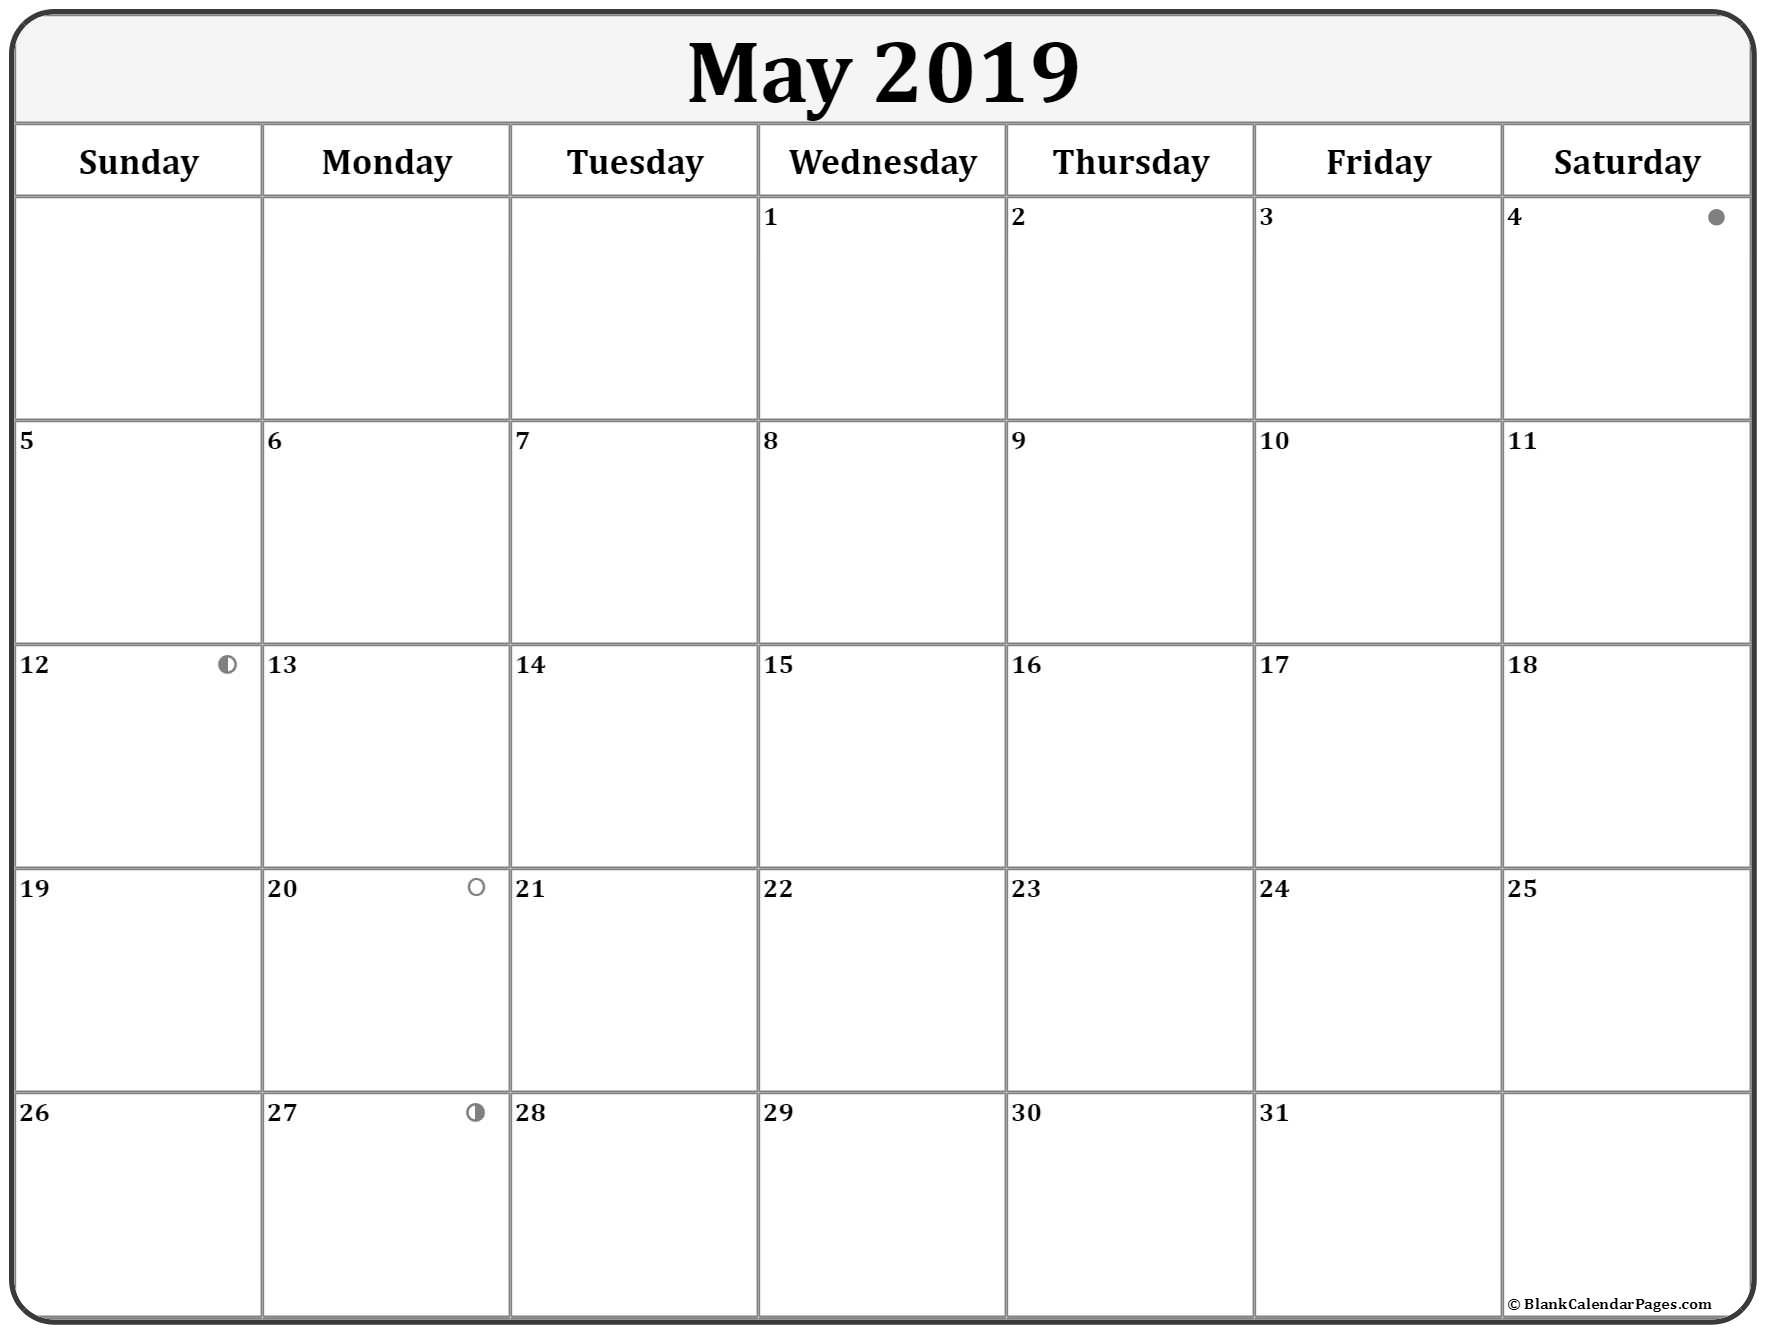 May 2019 Calendar With 4 Simple Moon Phases | Calendar